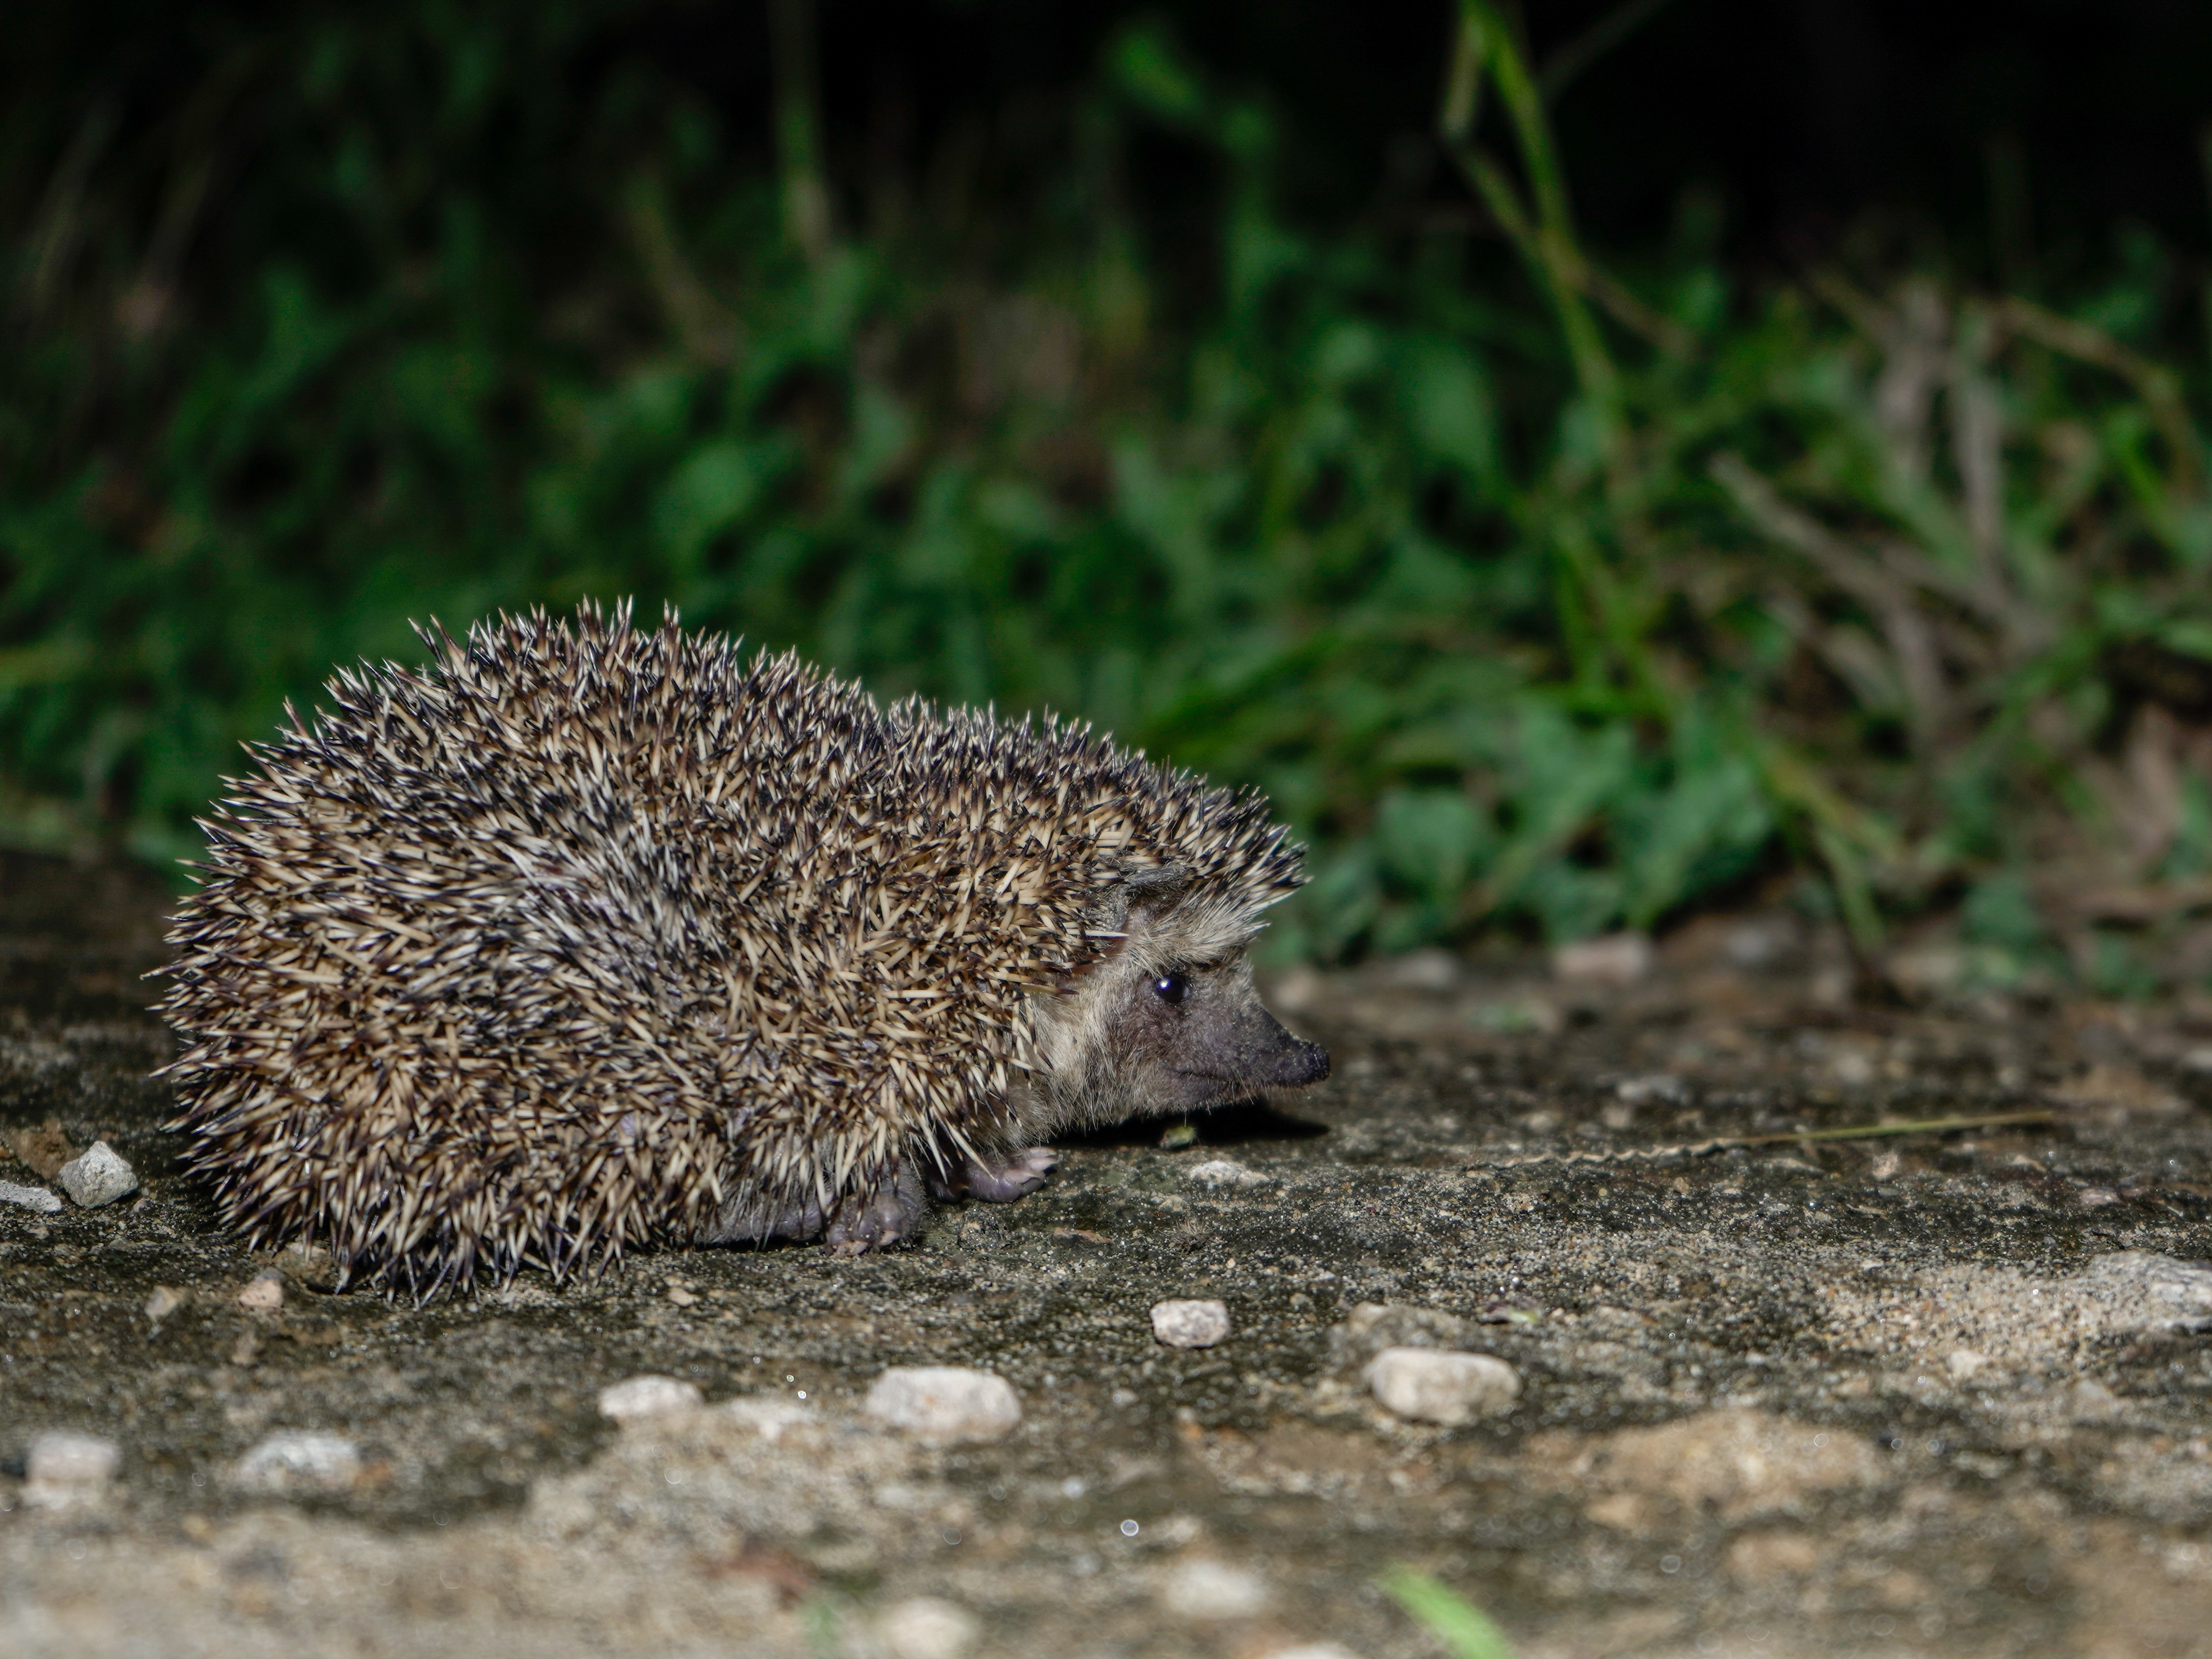 Are bare-bellied hedgehogs really extinct?